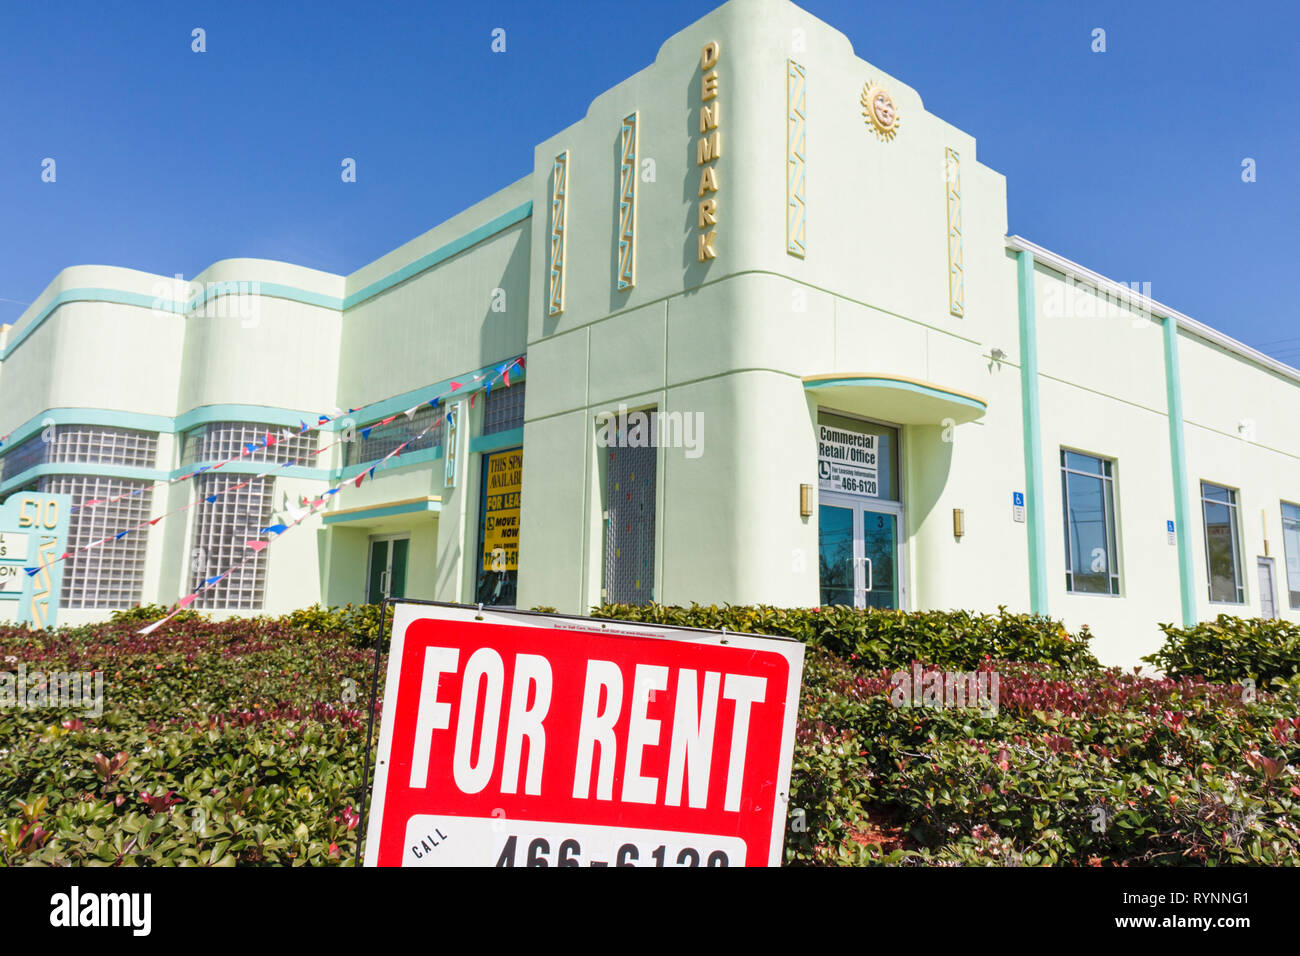 Florida Saint St. Lucie County,Fort Ft. Pierce,building,commercial real estate,for rent,sign,glass block,economy,restored,renovated,FL090219015 Stock Photo